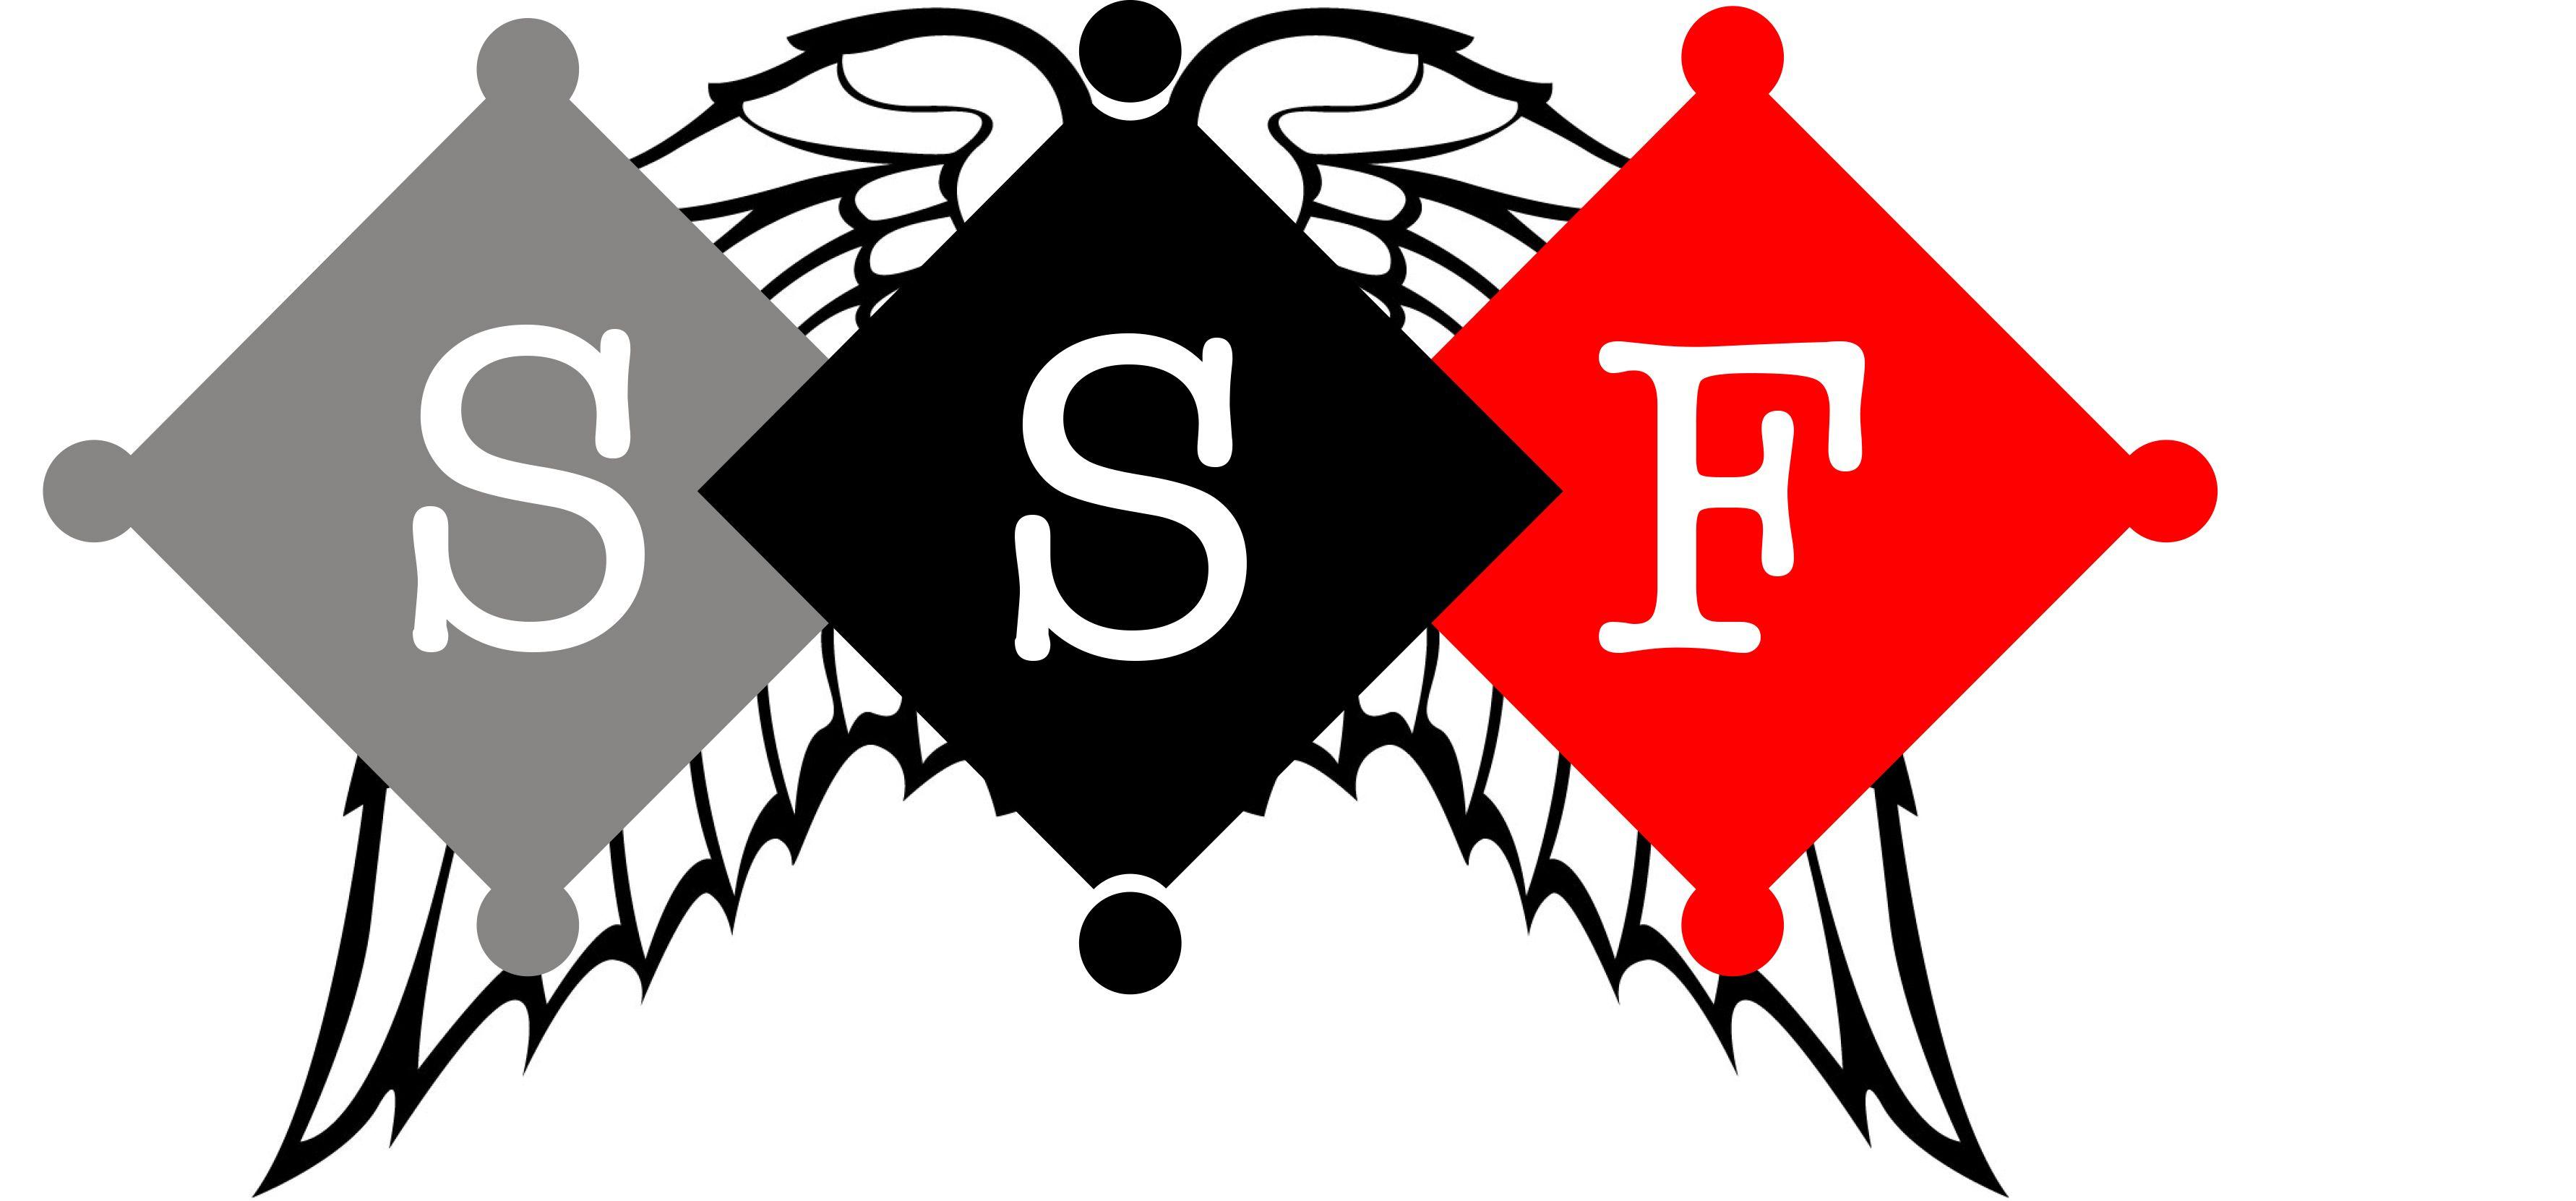 File:Insignia of the Special Security Force.svg - Wikipedia